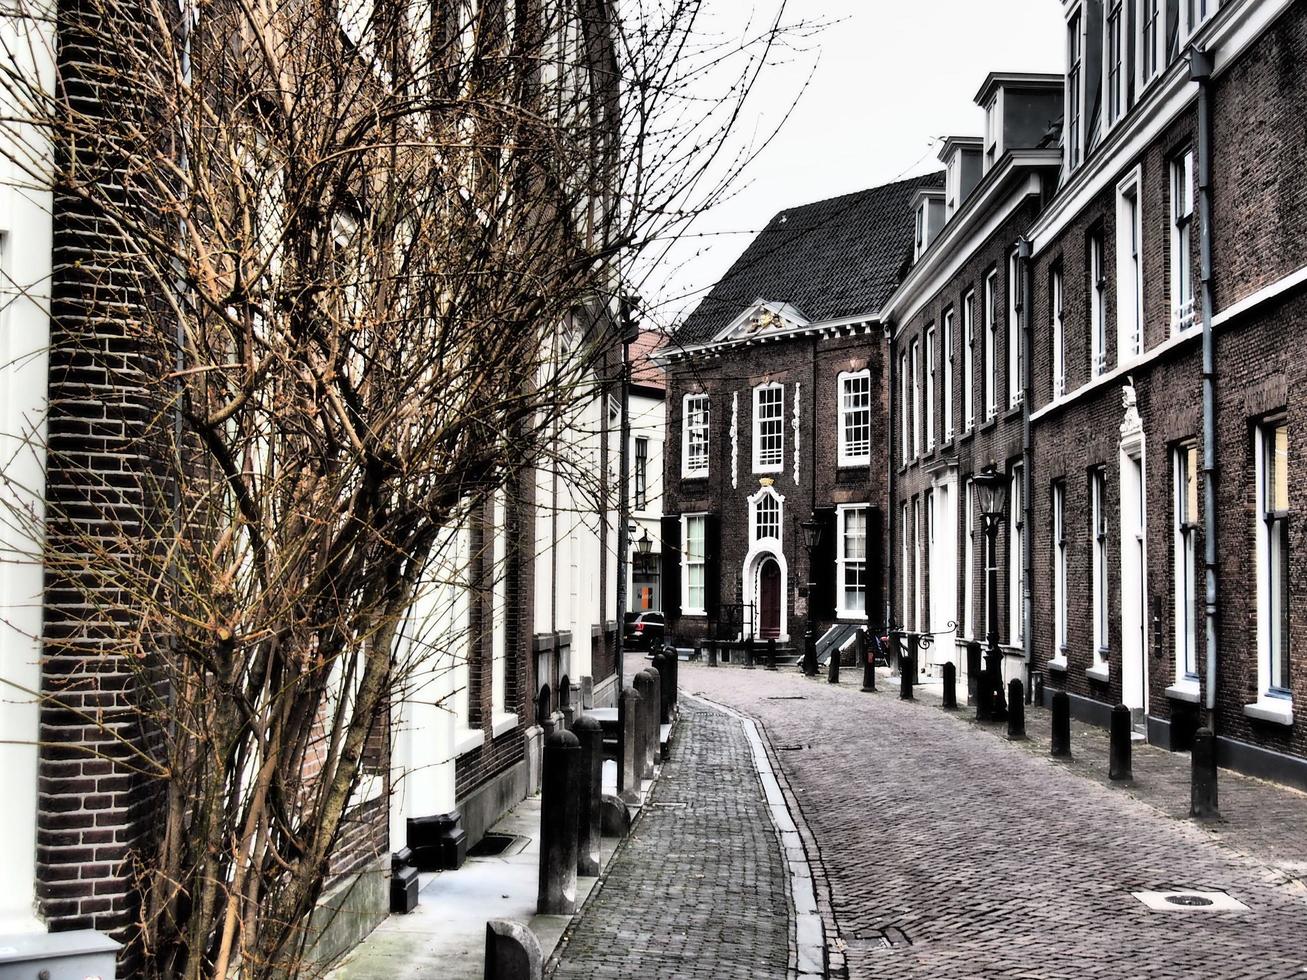 the city of Utrecht in the netherlands photo